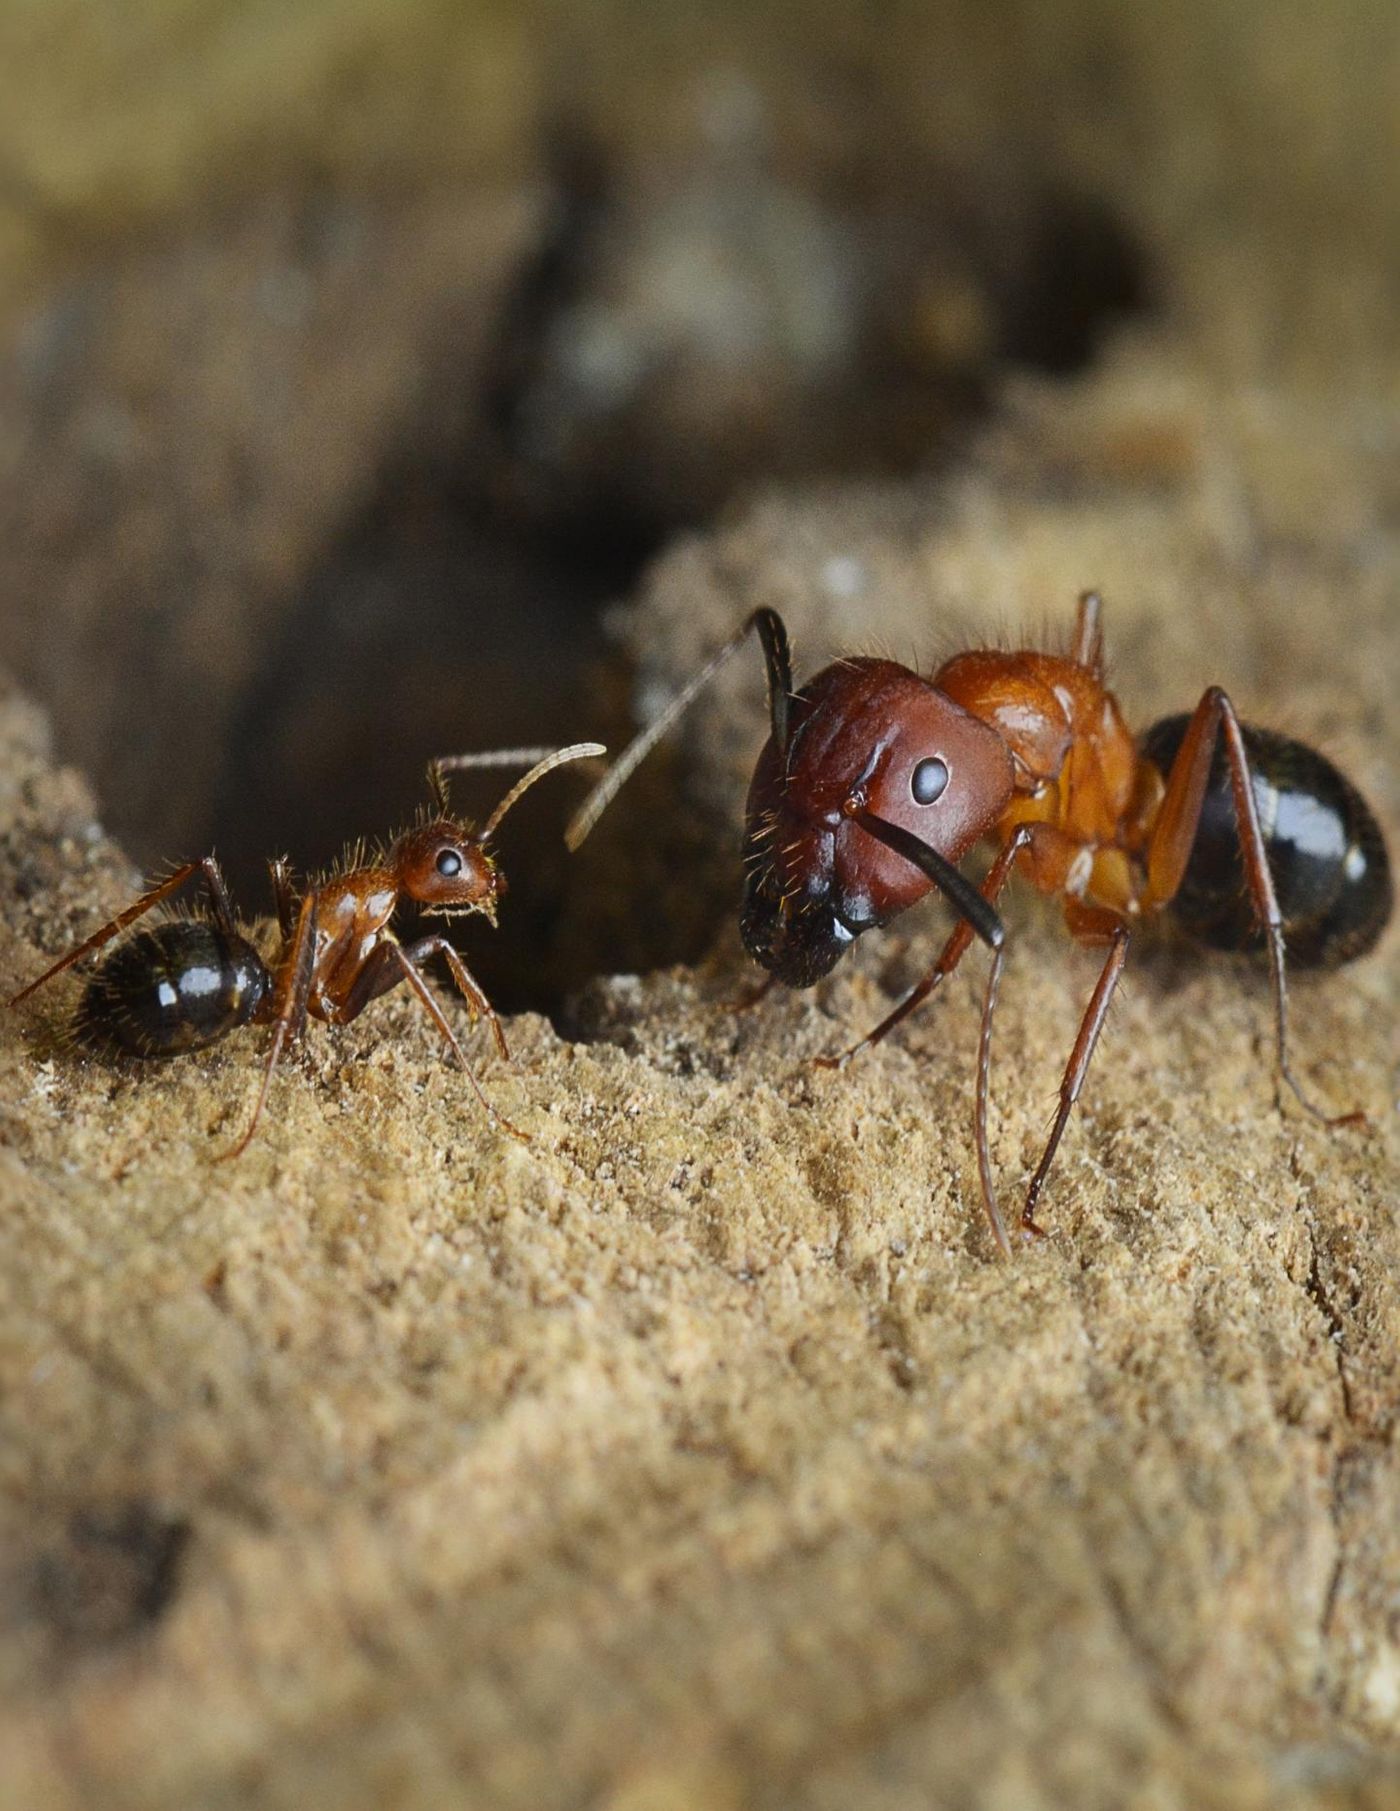 This photograph shows Minor (left) and Major (right) C. floridanus workers. Typically, Minor workers perform the vast majority of foraging, while Major workers defend the nest from intruders and rarely forage for food./ Credit: Riley Graham